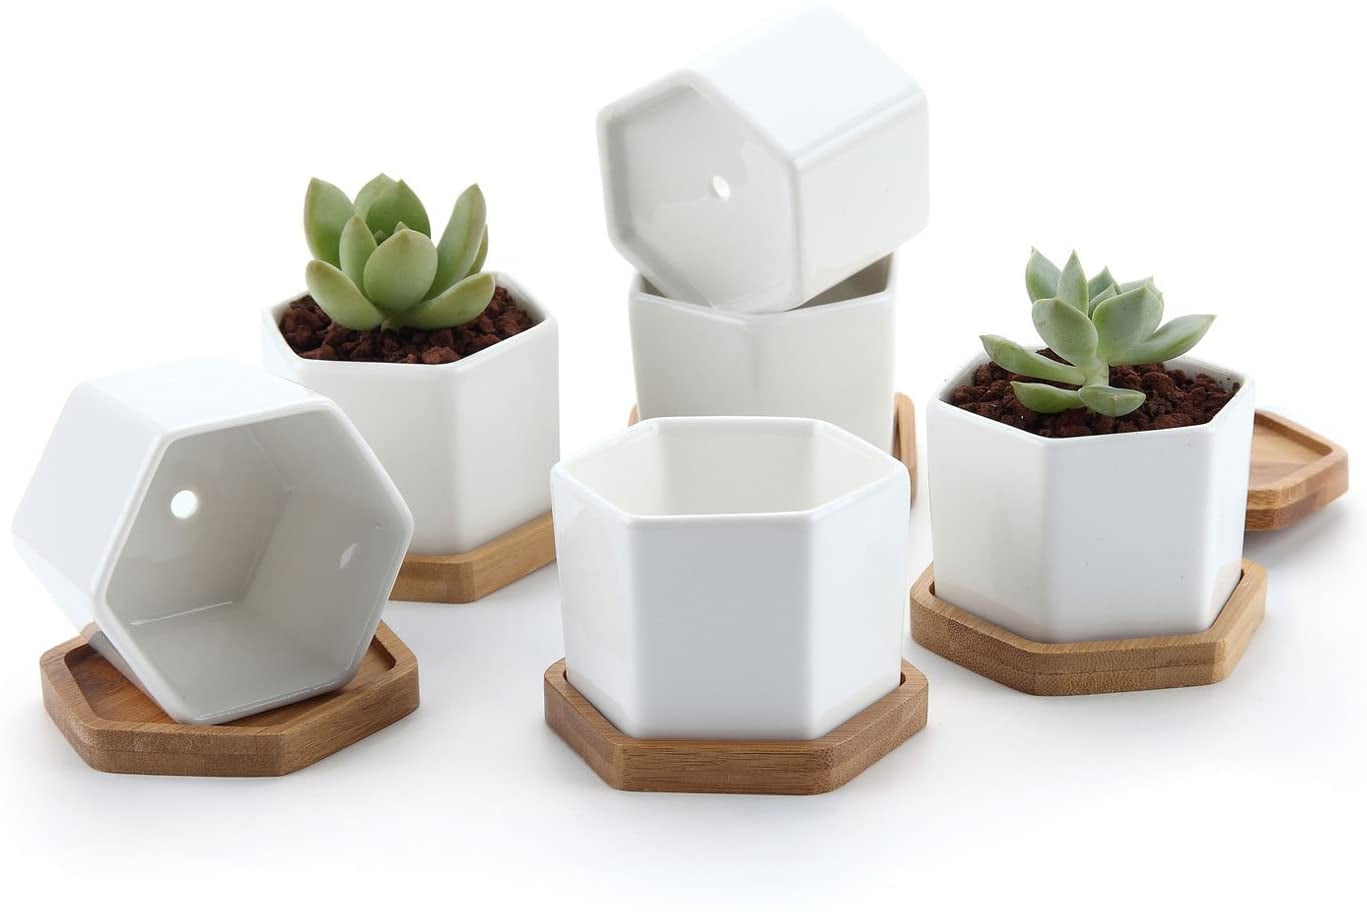 T4U 7cm Ceramic White Collection NO.31 Succulent Plant Pot//Cactus Plant Pot Flower Pot//Container//Planter with Bamboo Trays Package 1 Pack of 3